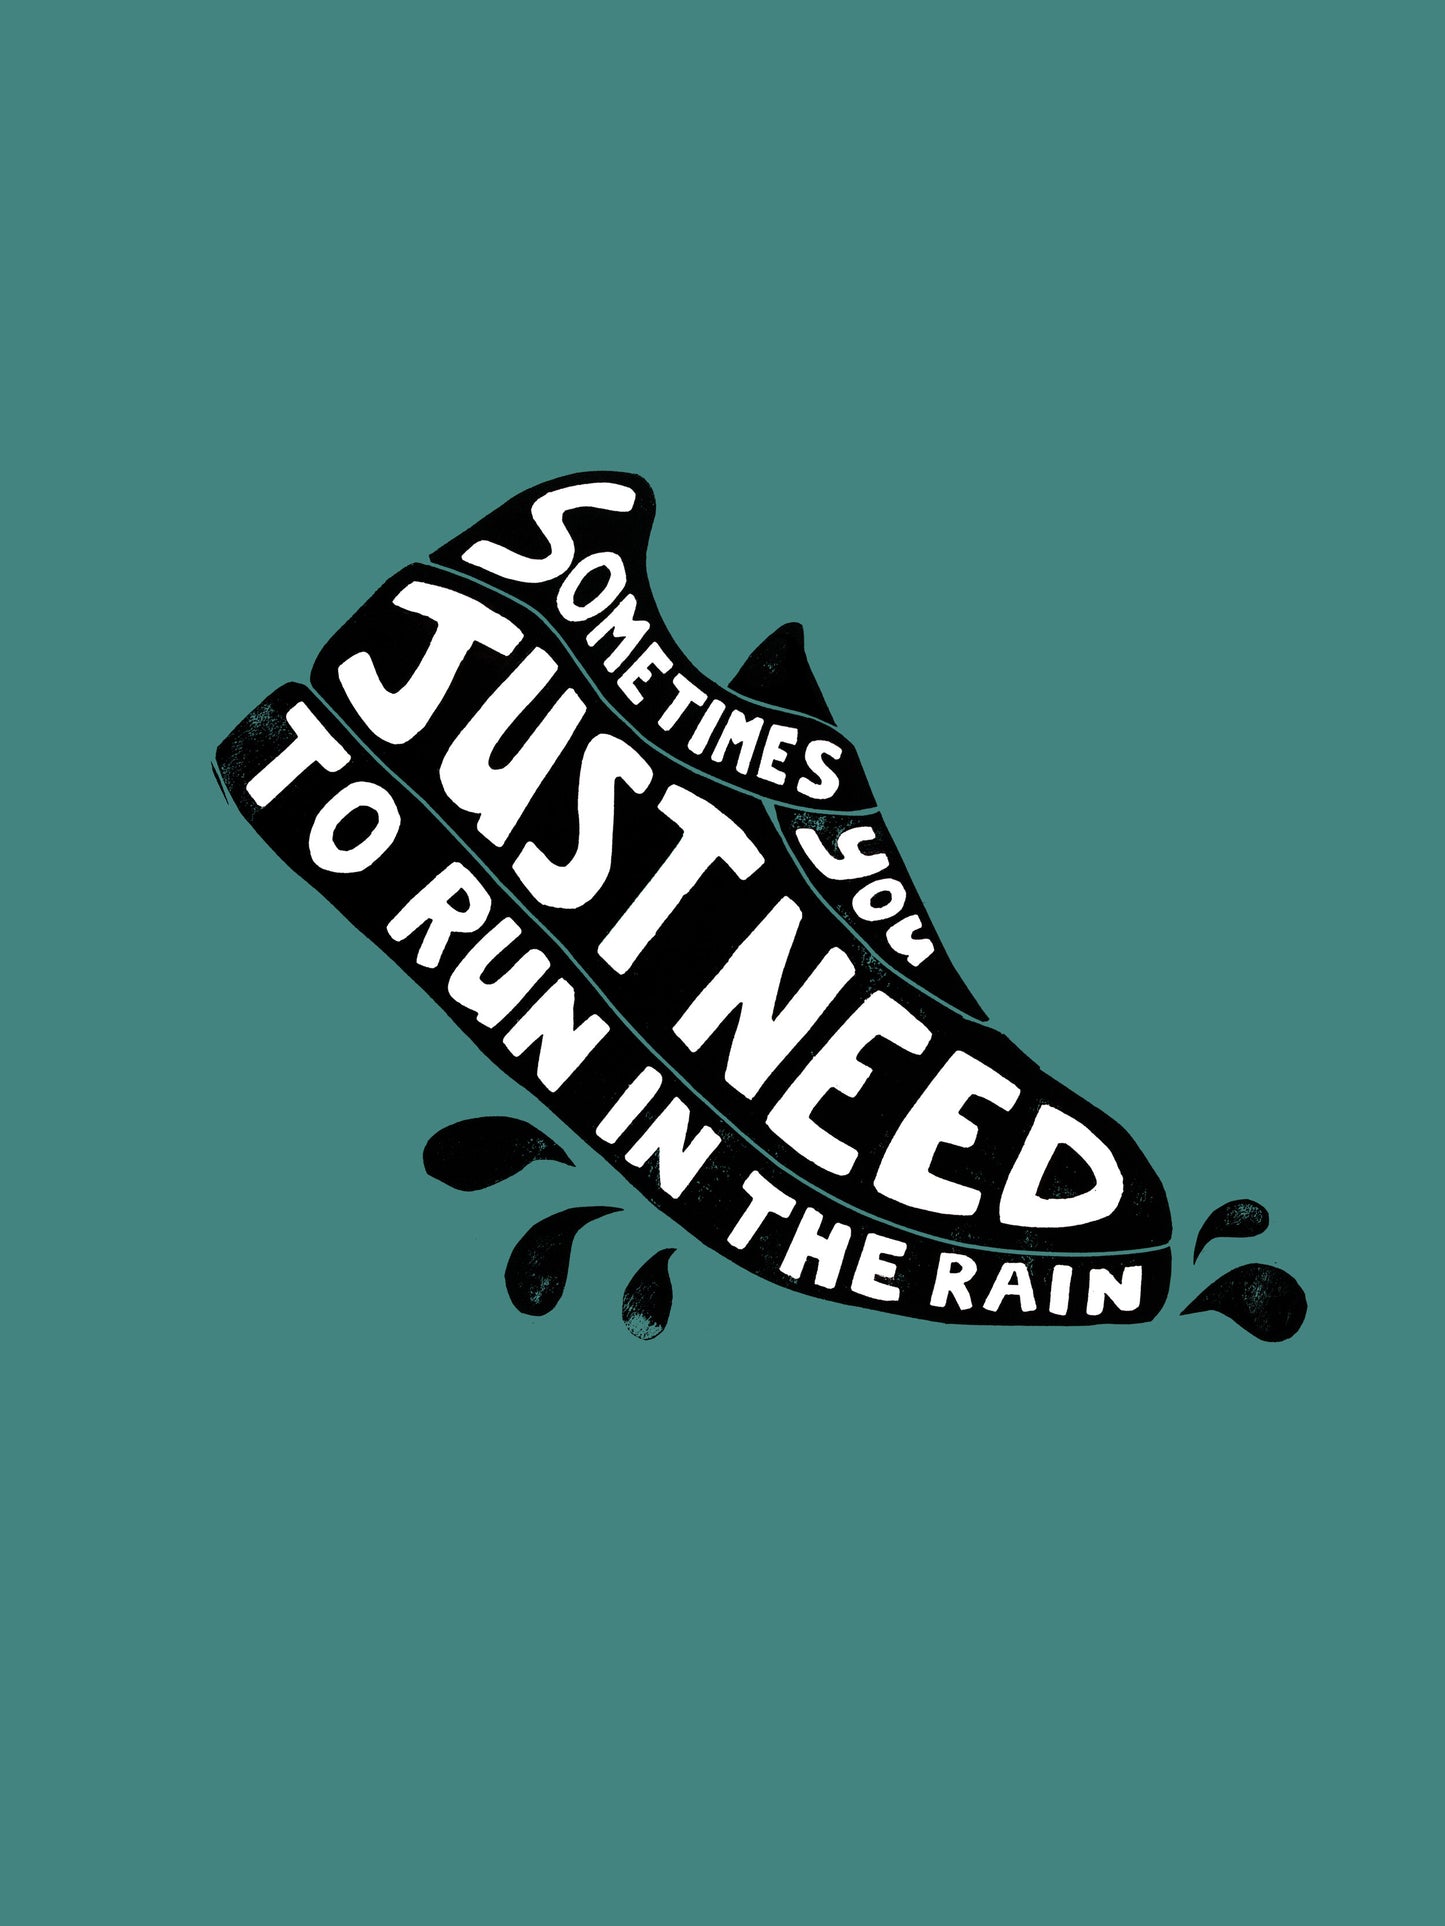 Sometimes You Just Need To Run In The Rain - Print